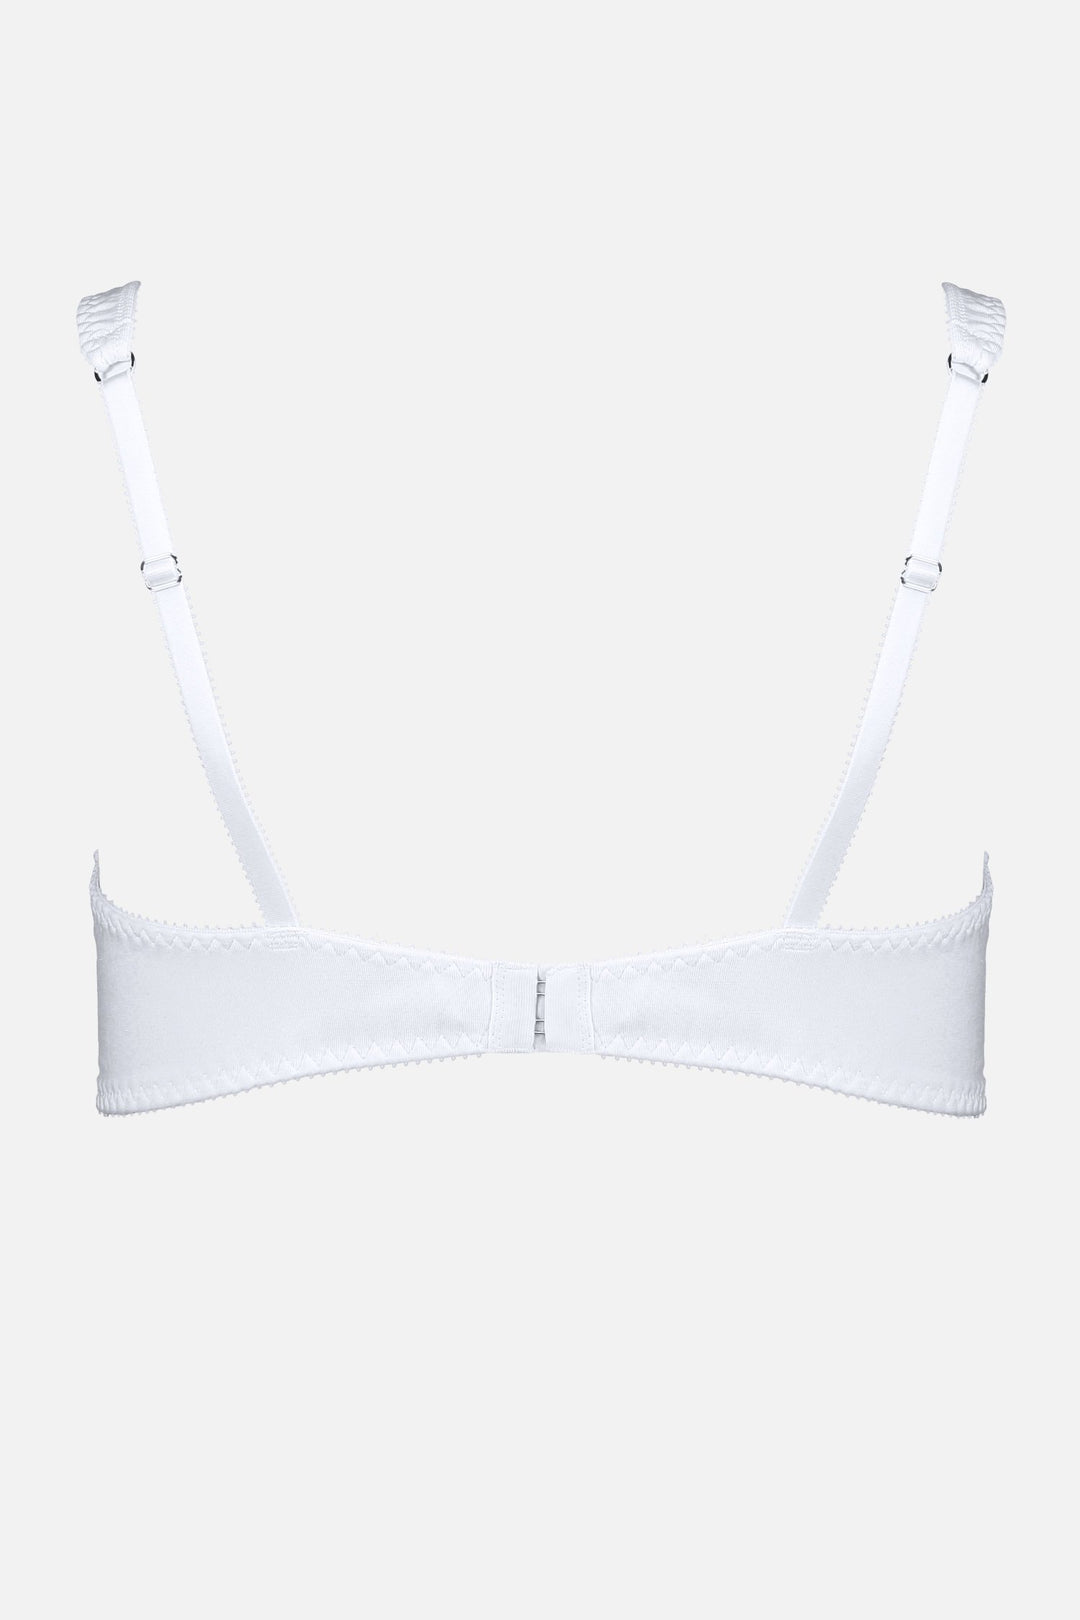 Videris Lingerie Sarah wire free soft cup bra in white embroidered TENCEL™ features adjustable back straps and hook and eyes